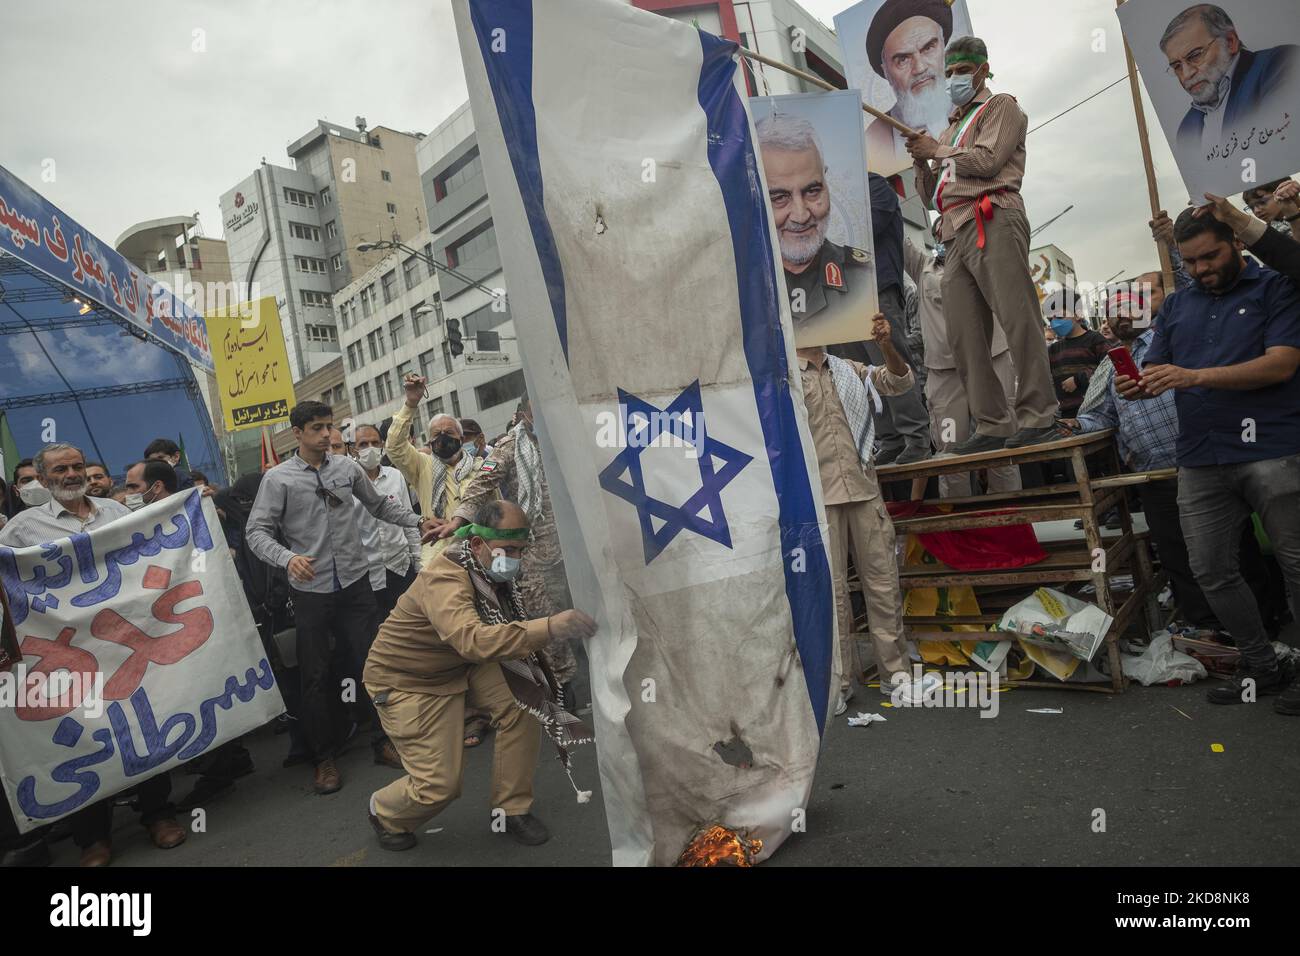 An Iranian demonstrator burns an Israeli flag as the other demonstrators hold portraits of the former commander of Iran’s Islamic Revolutionary Guard Corps’ (IRGC) Quds Force, General Qasem Soleimani (C), Iranian Nuclear scientist, Mohsen Fakhrizadeh (R), and Iran’s Late Leader Ayatollah Ruhollah Khomeini in downtown Tehran during a rally commemorating the International Quds Day, also known as the Jerusalem day, on April 29, 2022. (Photo by Morteza Nikoubazl/NurPhoto) Stock Photo